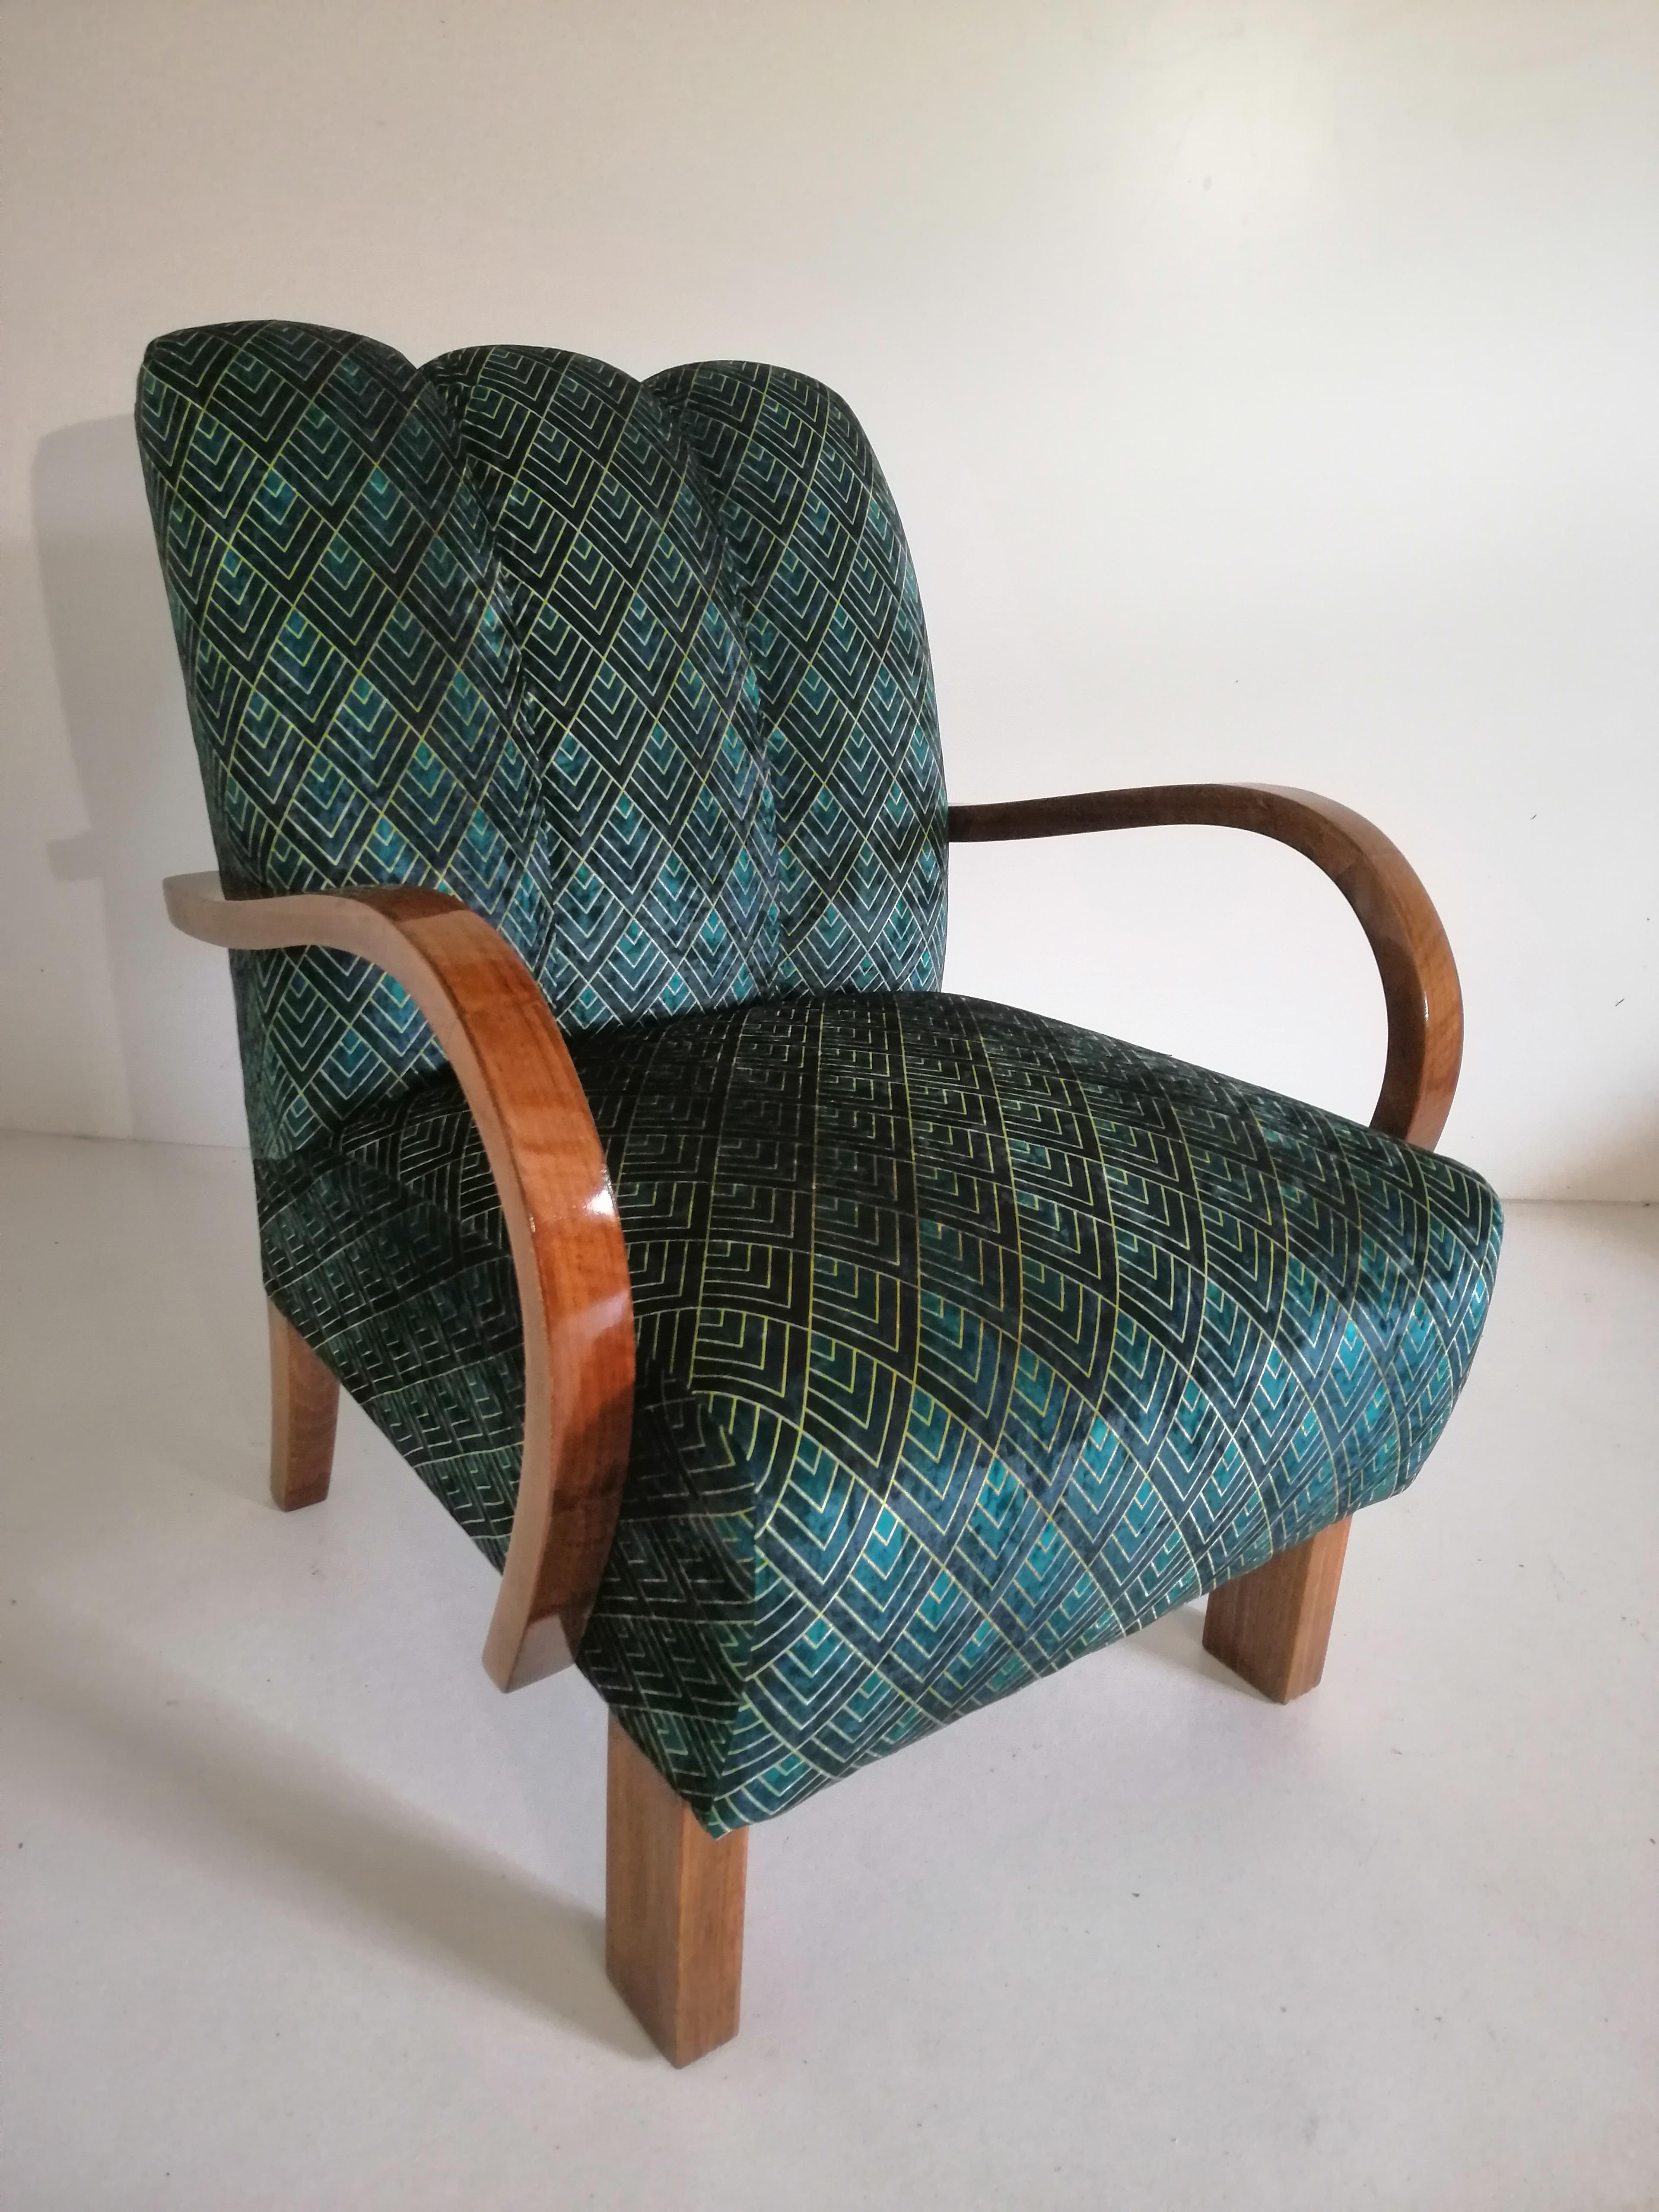 Art Deco armchair from 1940, Czech Republic.
Designed by a famous Czech designer Jindrich Halabala, (a Czech designer ranked among the most outstanding creators of the modern period. The peak of his career fell on the 1930s and 1940s when he worked